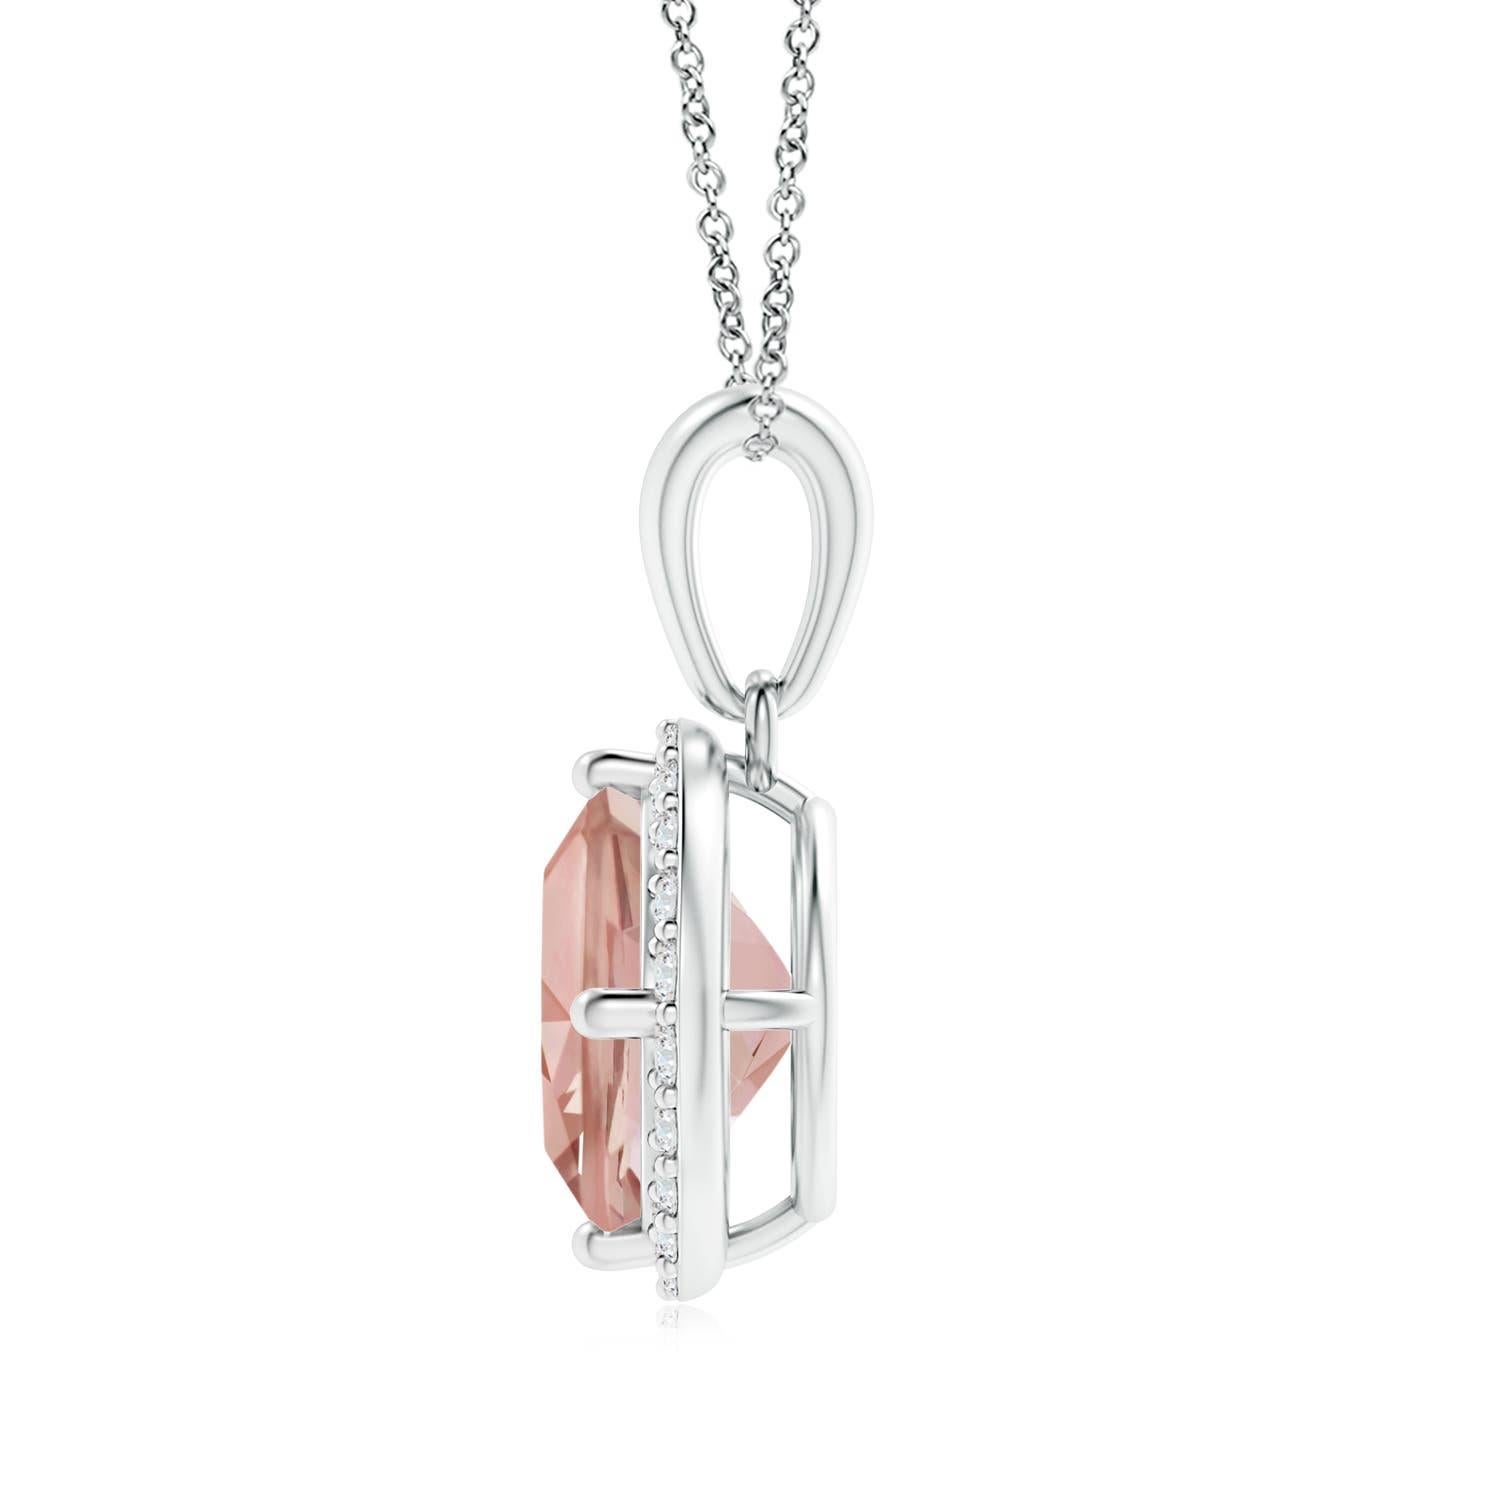 Hanging from a plain lustrous bale, this morganite and diamond halo pendant in 18k white gold exudes a distinctive appeal. The cushion morganite is secured sideways in a claw prong setting and surrounded by a halo of diamond accents.
